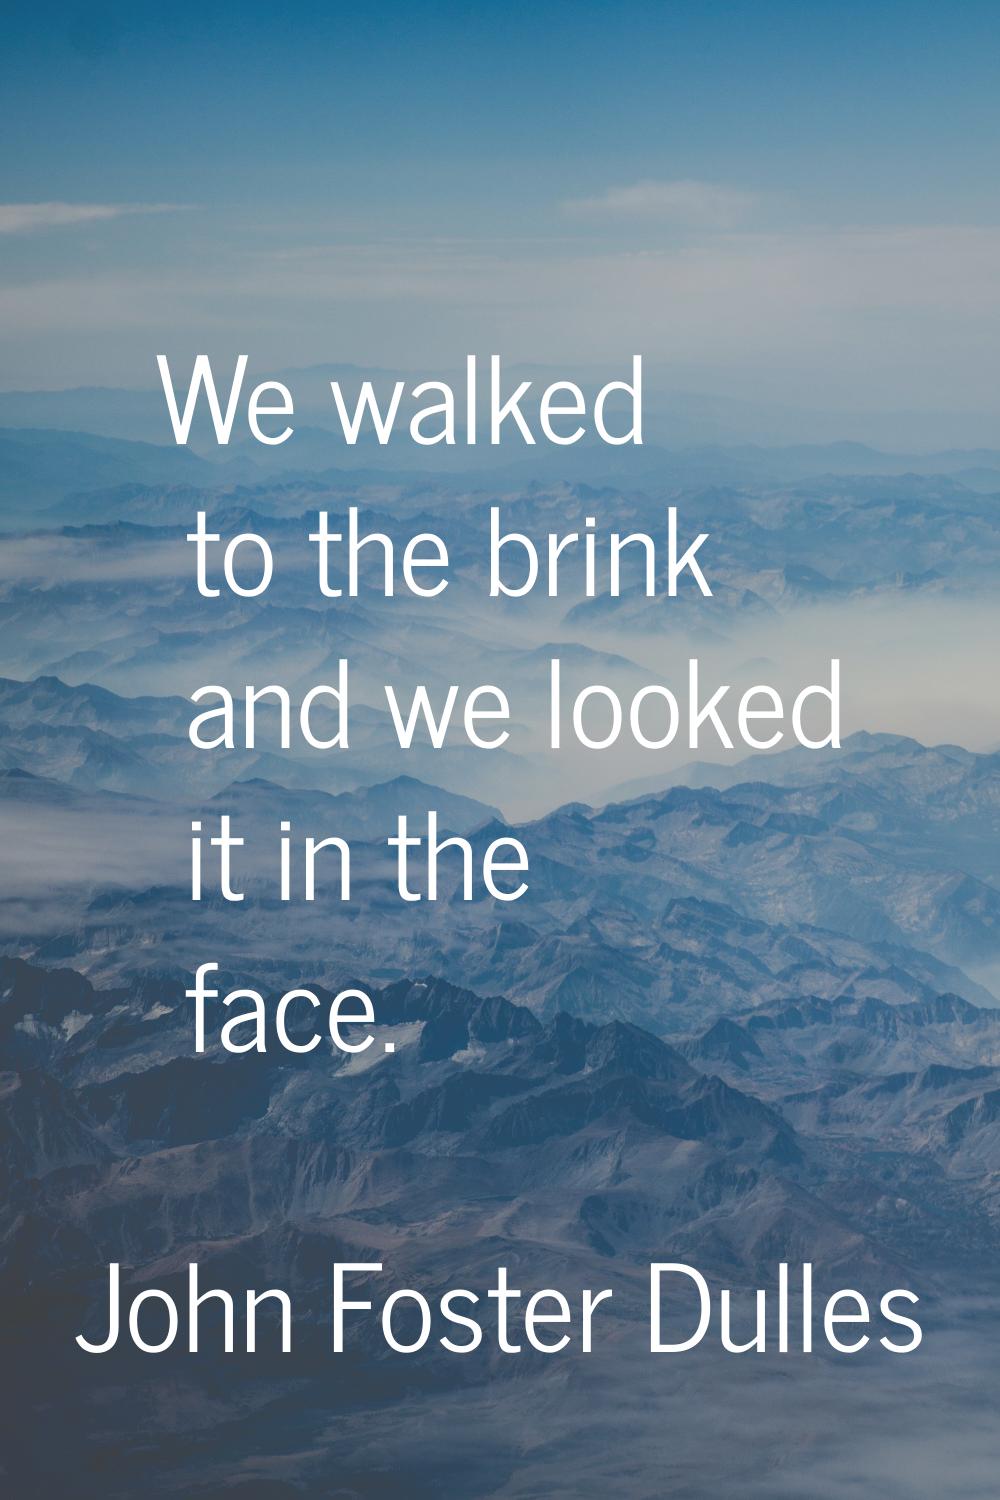 We walked to the brink and we looked it in the face.